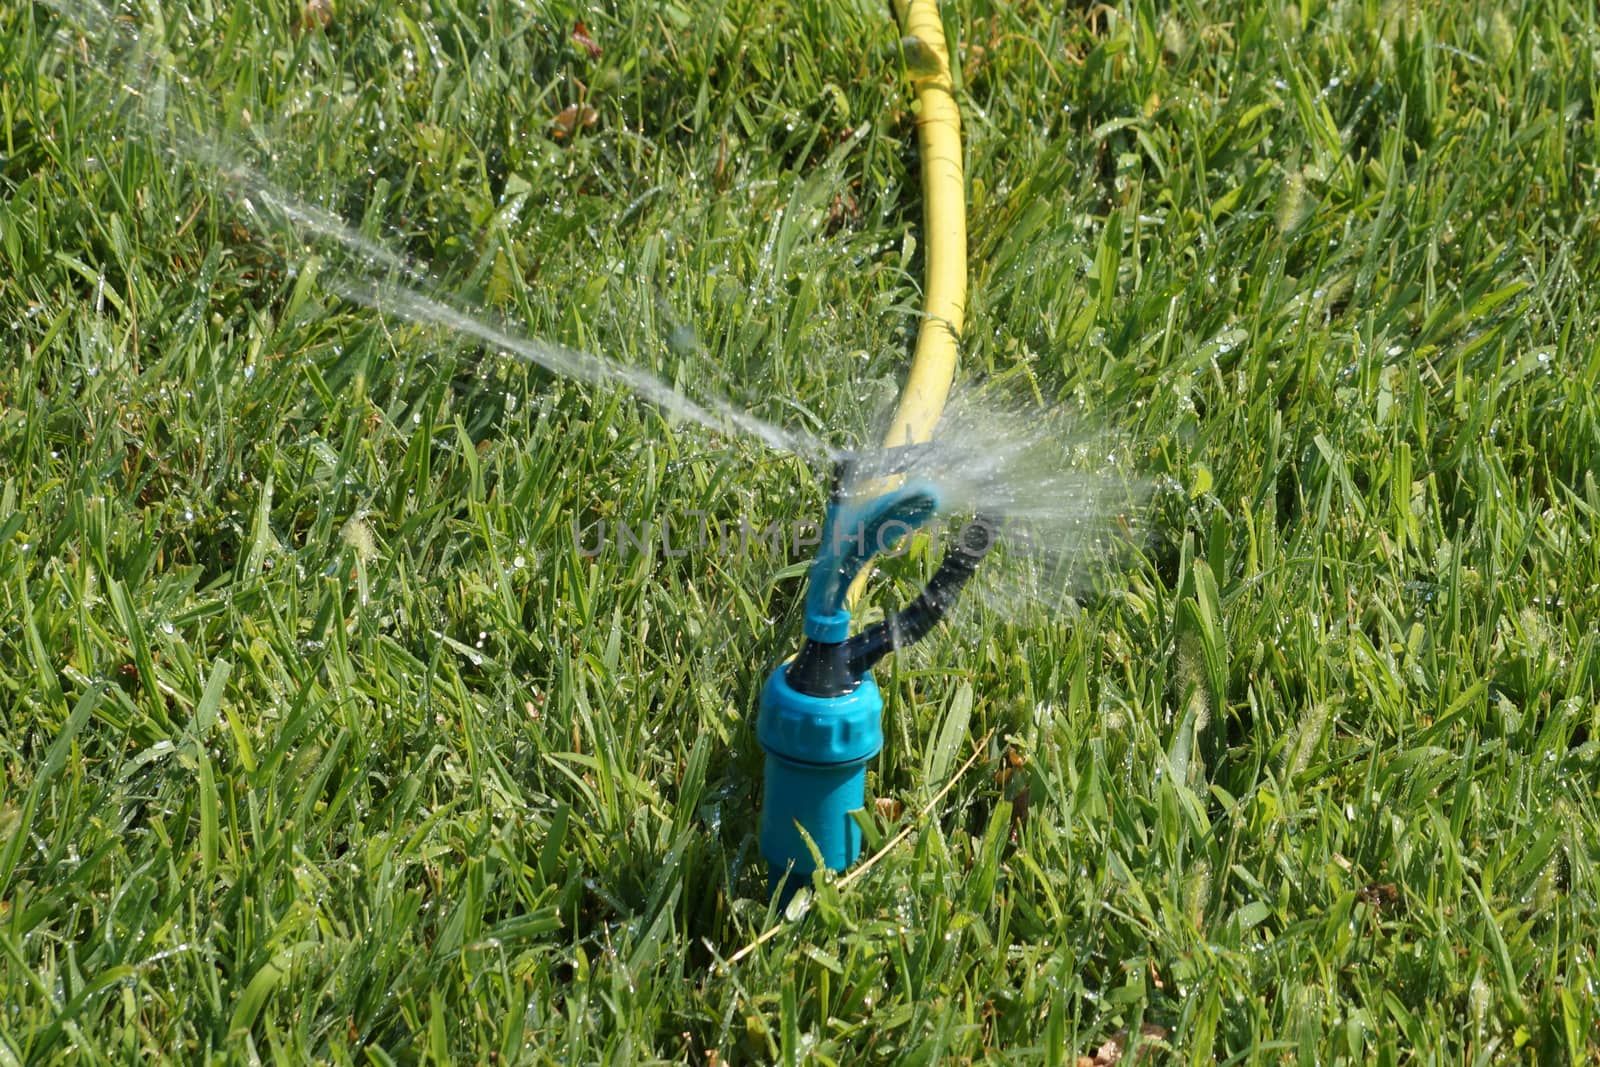 automatic watering the lawn in the park close up by Annado